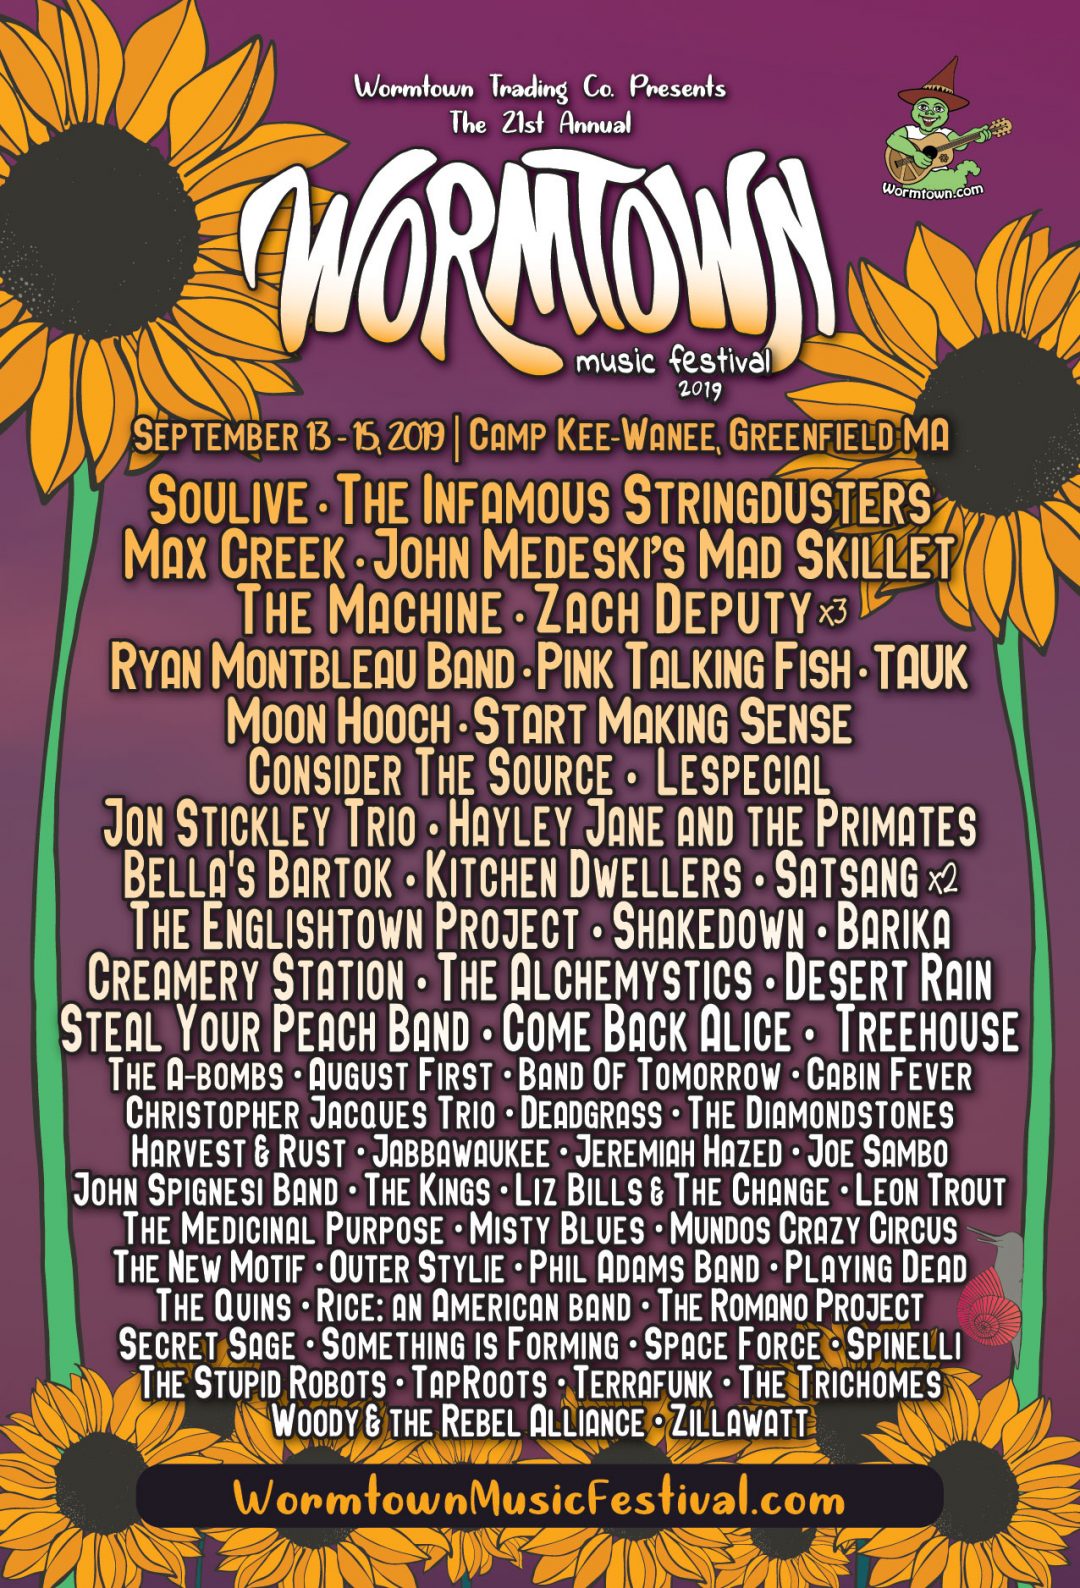 WORMTOWN LINEUP ANNOUNCE! Wormtown Trading Company